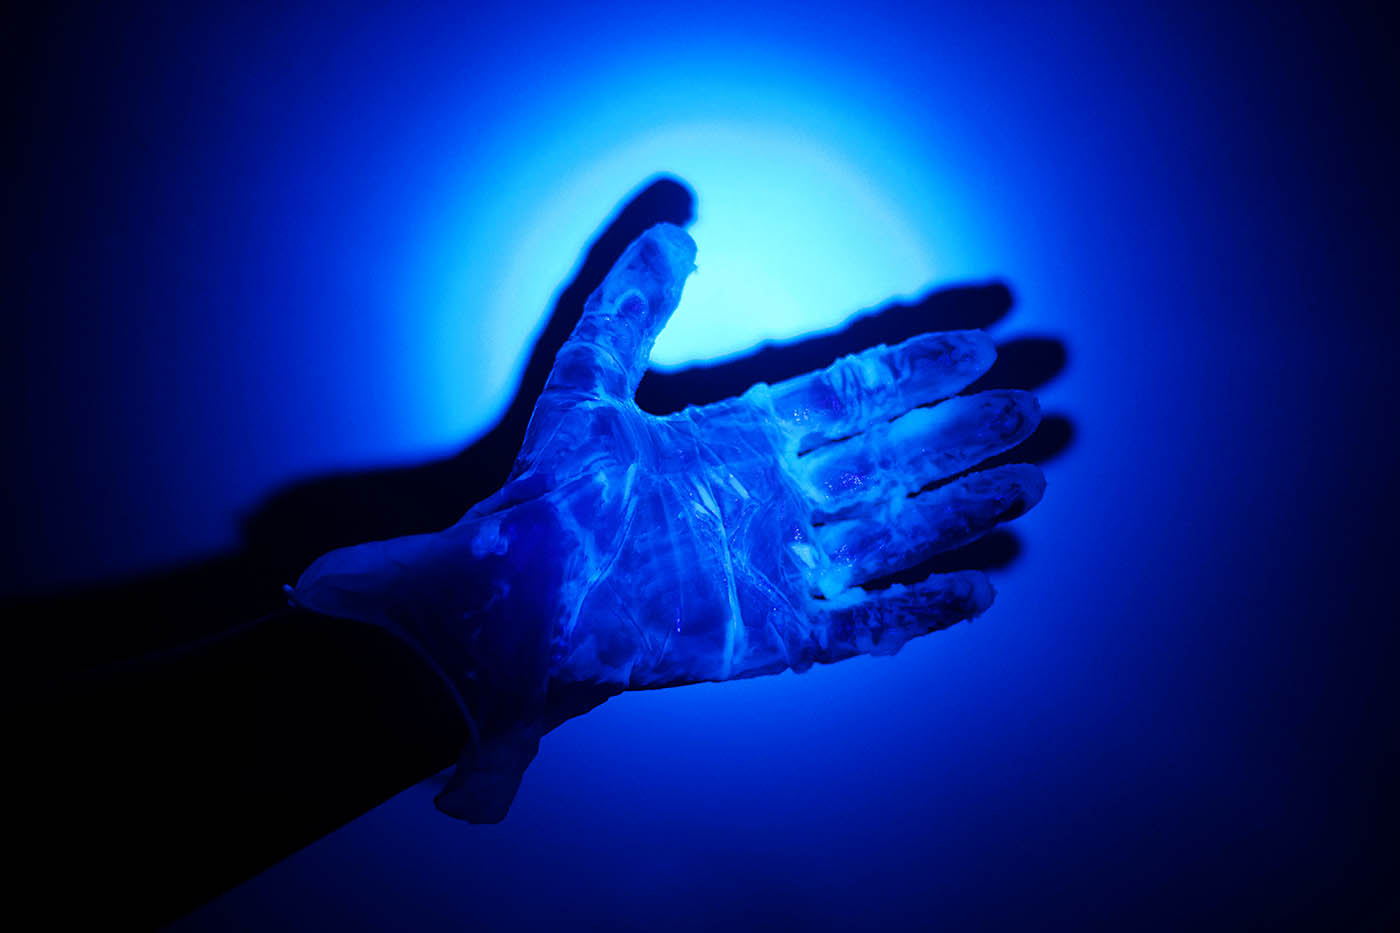 Glowing hand experiment from All for the Boys blog